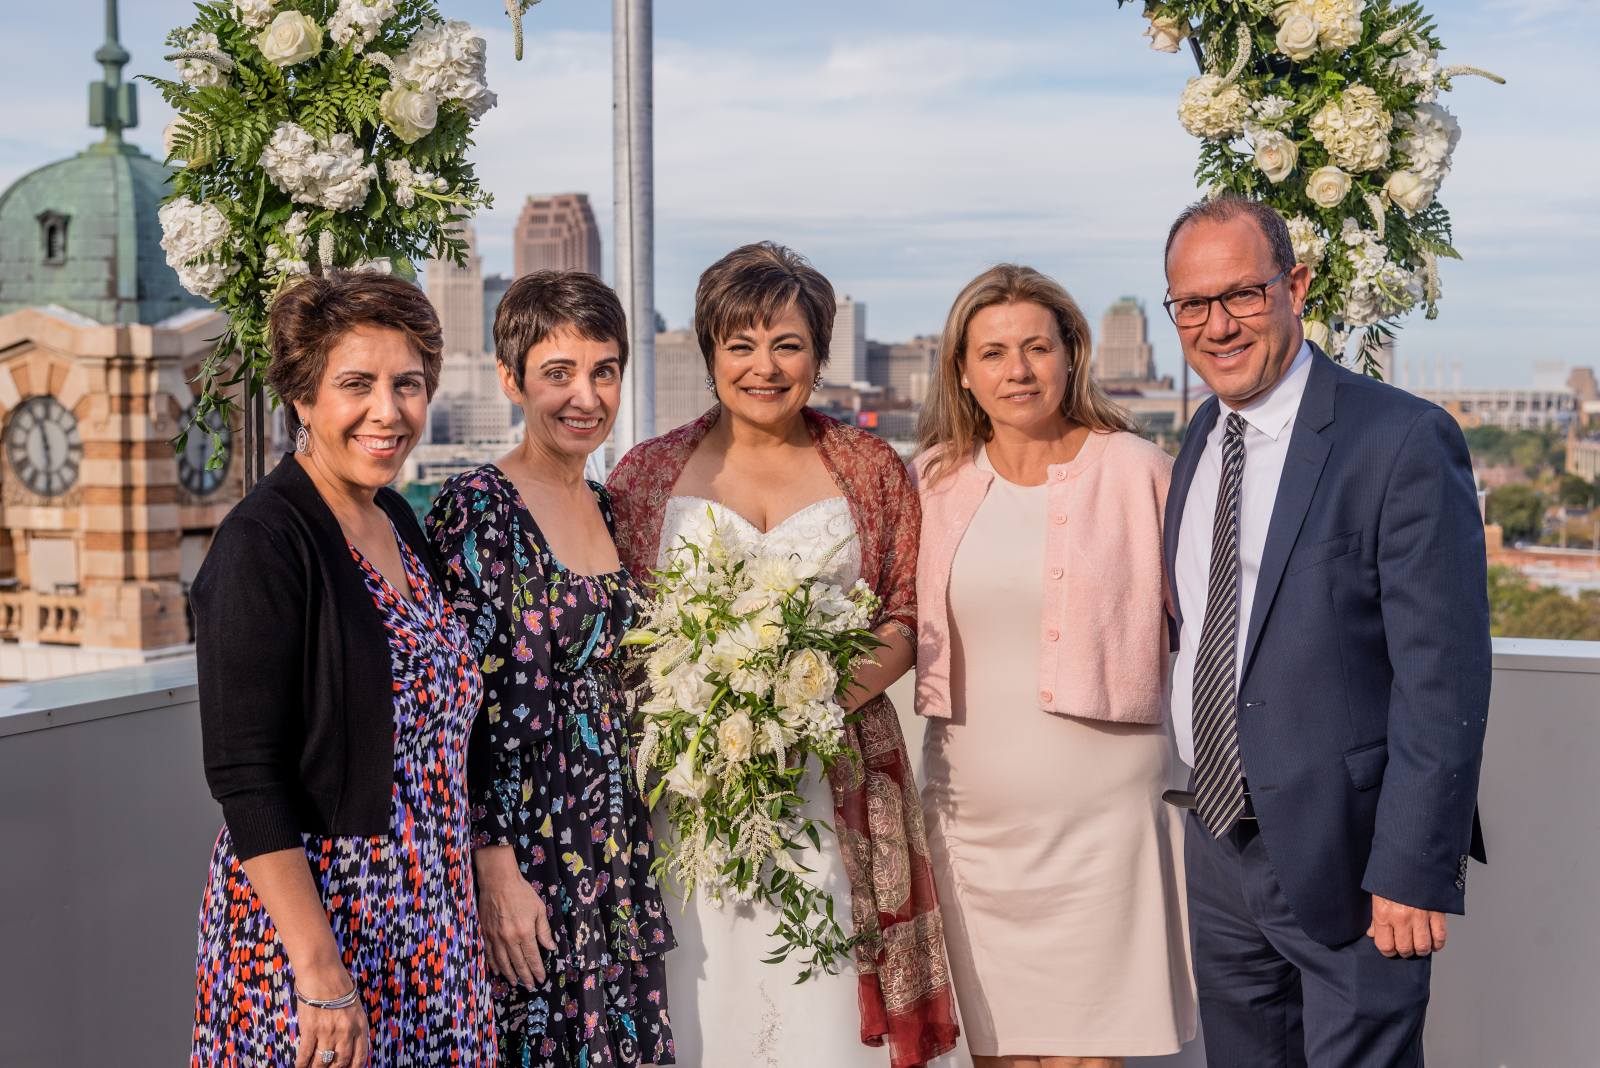 Bride with family, family portrait, older bride, older couple, romantic outdoor urban wedding ceremony at Penthouse Events, Ohio City, Cleveland Flats, downtown Cleveland skyline, West Side Market, Lake Erie